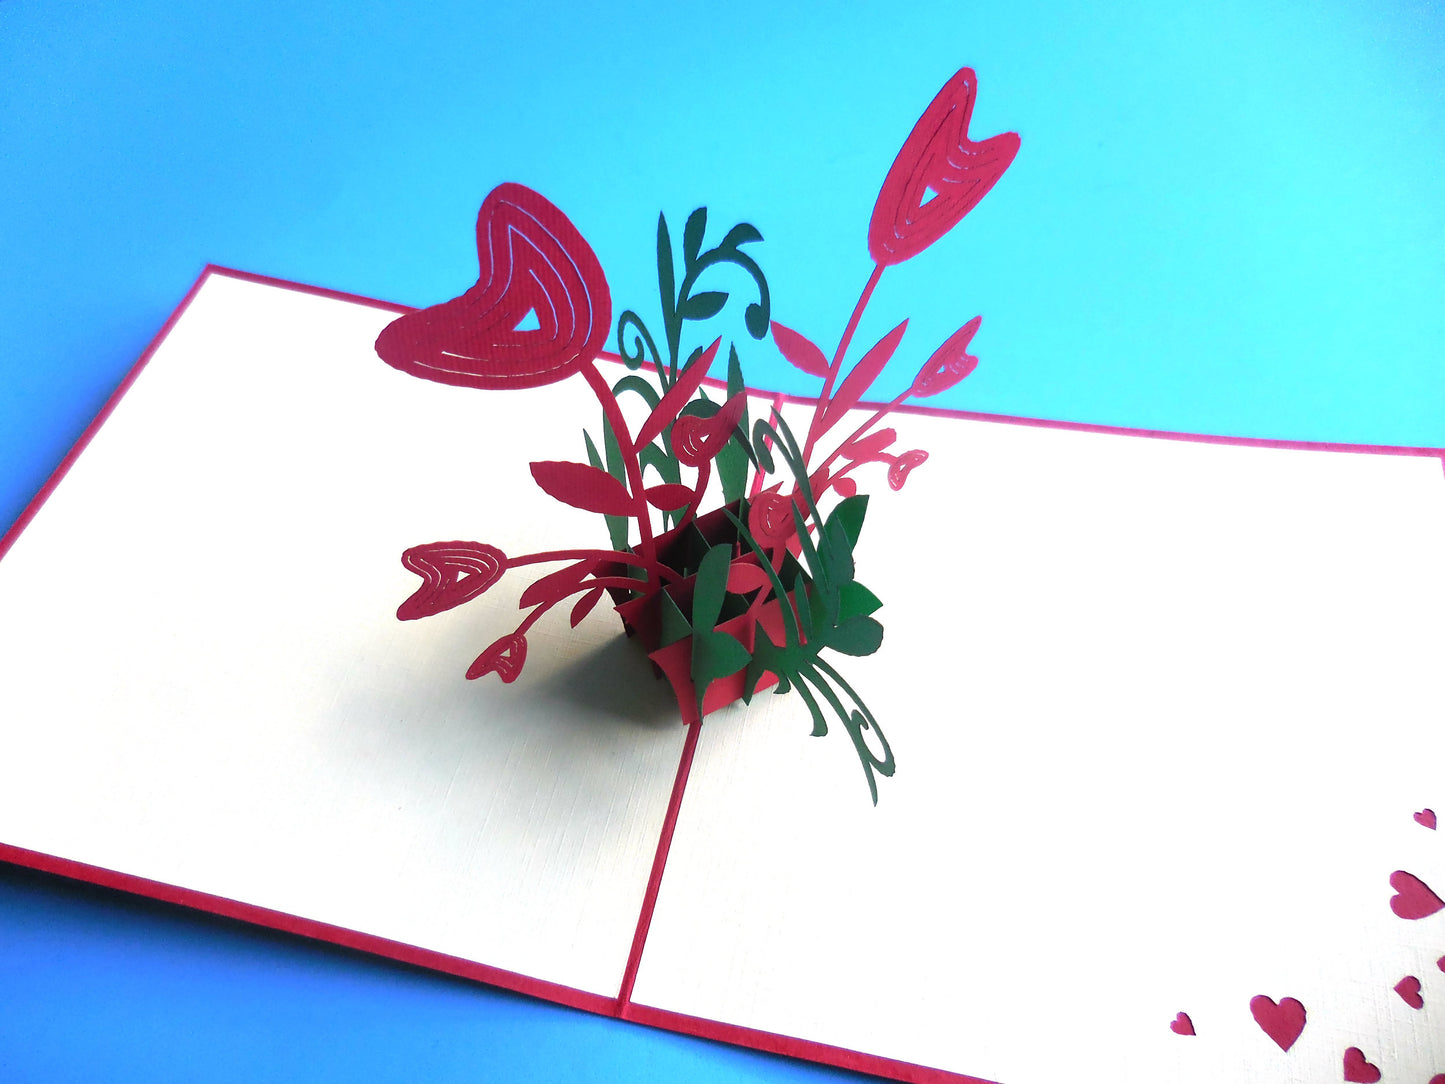 Happy Flowers 3D Pop Up Greeting Card - Admin Assistant Day - Christmas - Get Well - Love - Thank Yo - iGifts And Cards